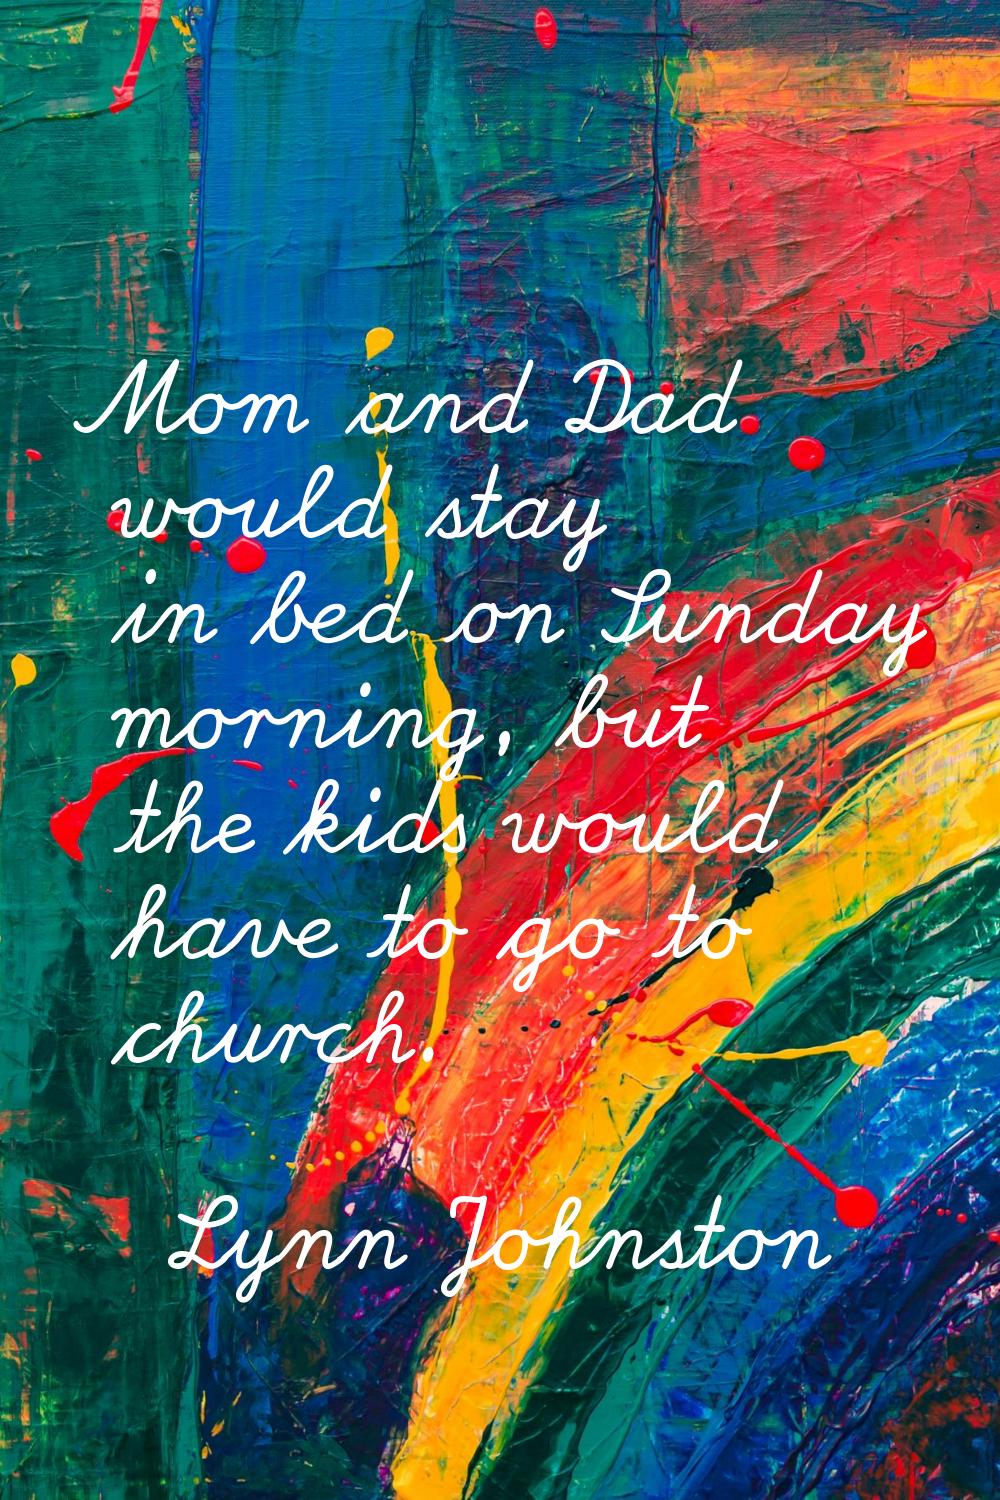 Mom and Dad would stay in bed on Sunday morning, but the kids would have to go to church.